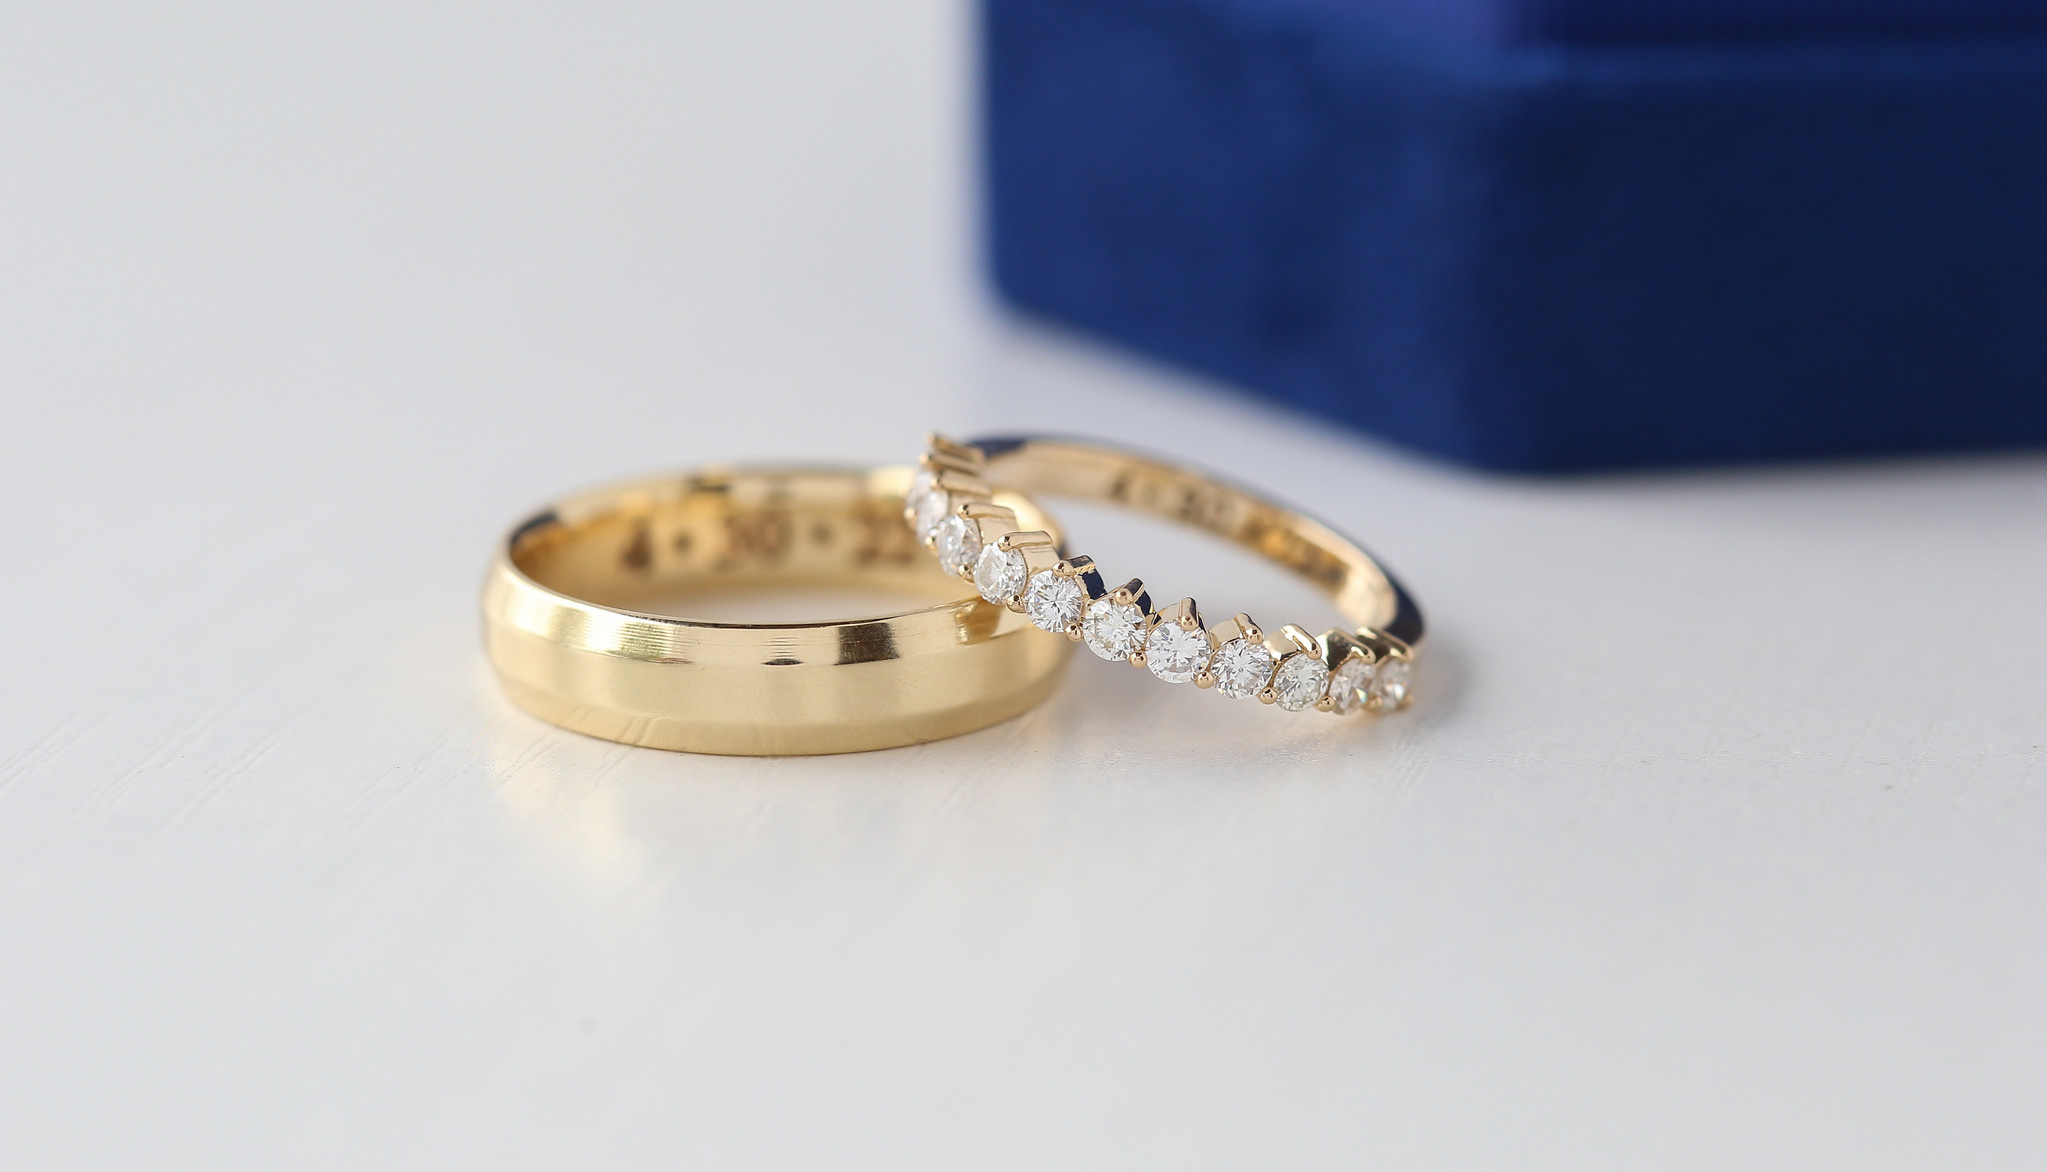 The Do's and Don'ts of Wedding Band Shopping